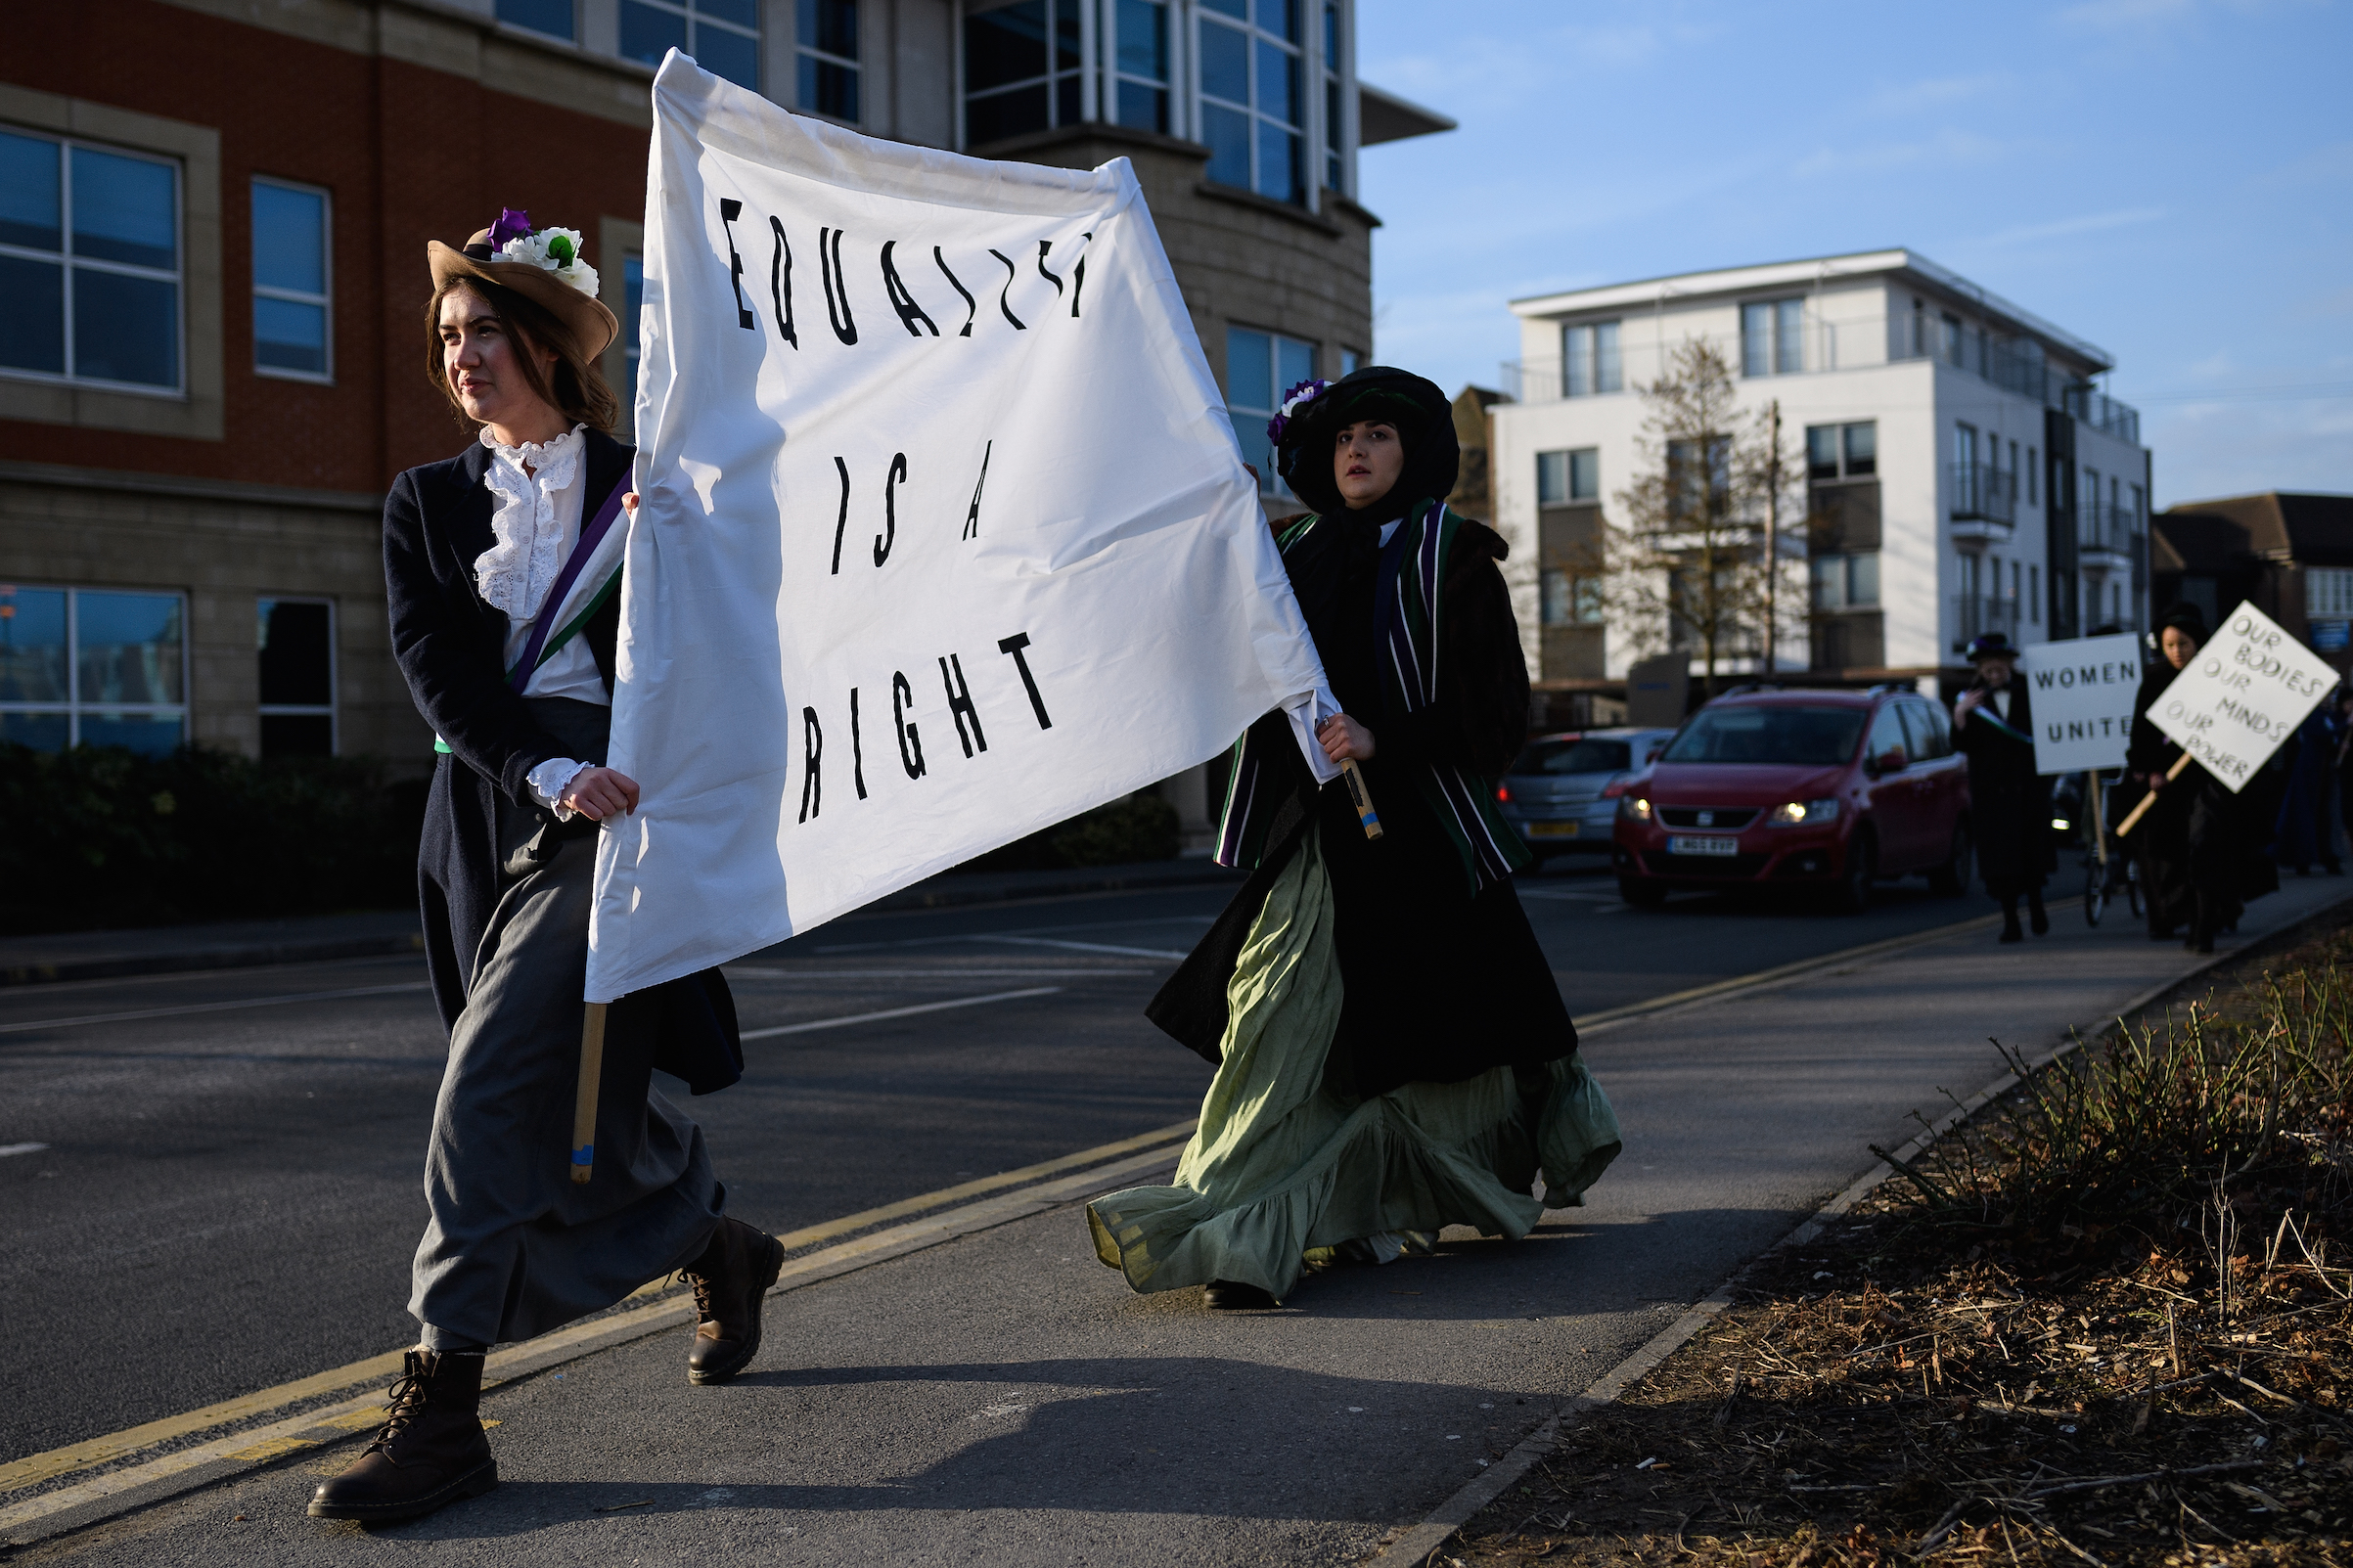 Students recreate a suffragette protest march through the town center at Royal Holloway, University of London on Feb. 6, 2018 in Egham, England. (Leon Neal—Getty Images)